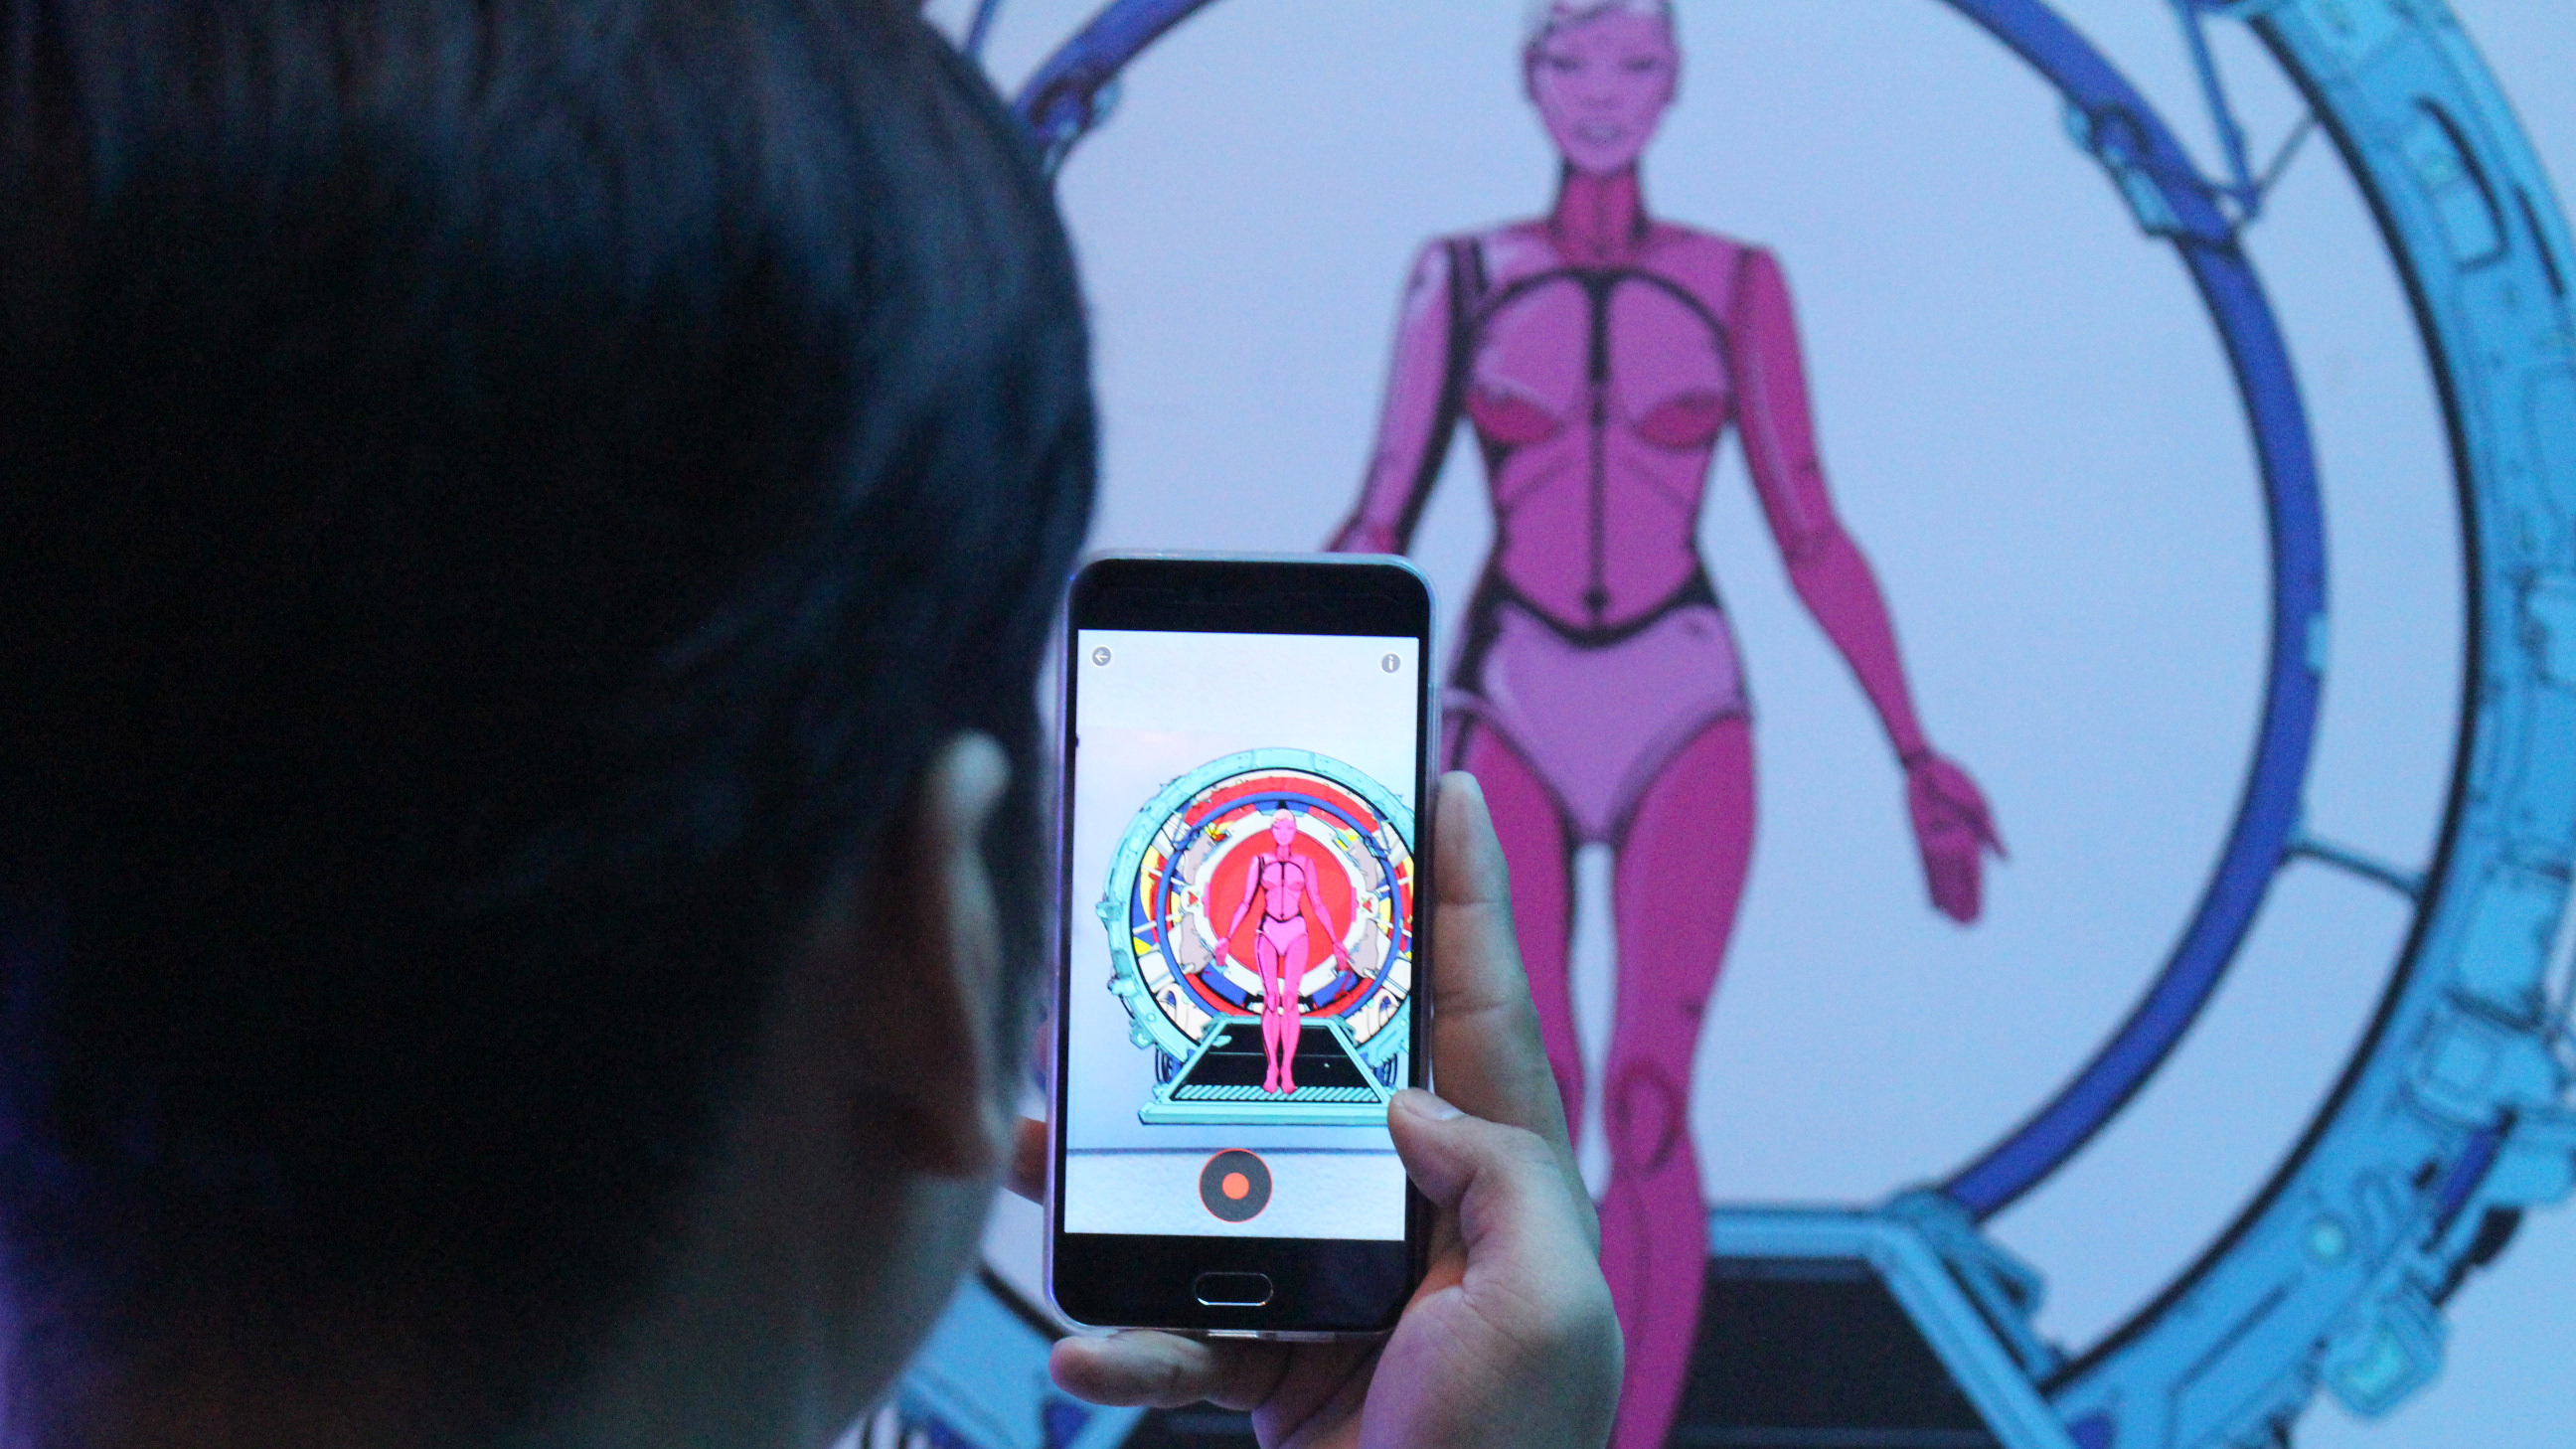 People can enjoy the artworks via an application called EyeJack on their smartphones.